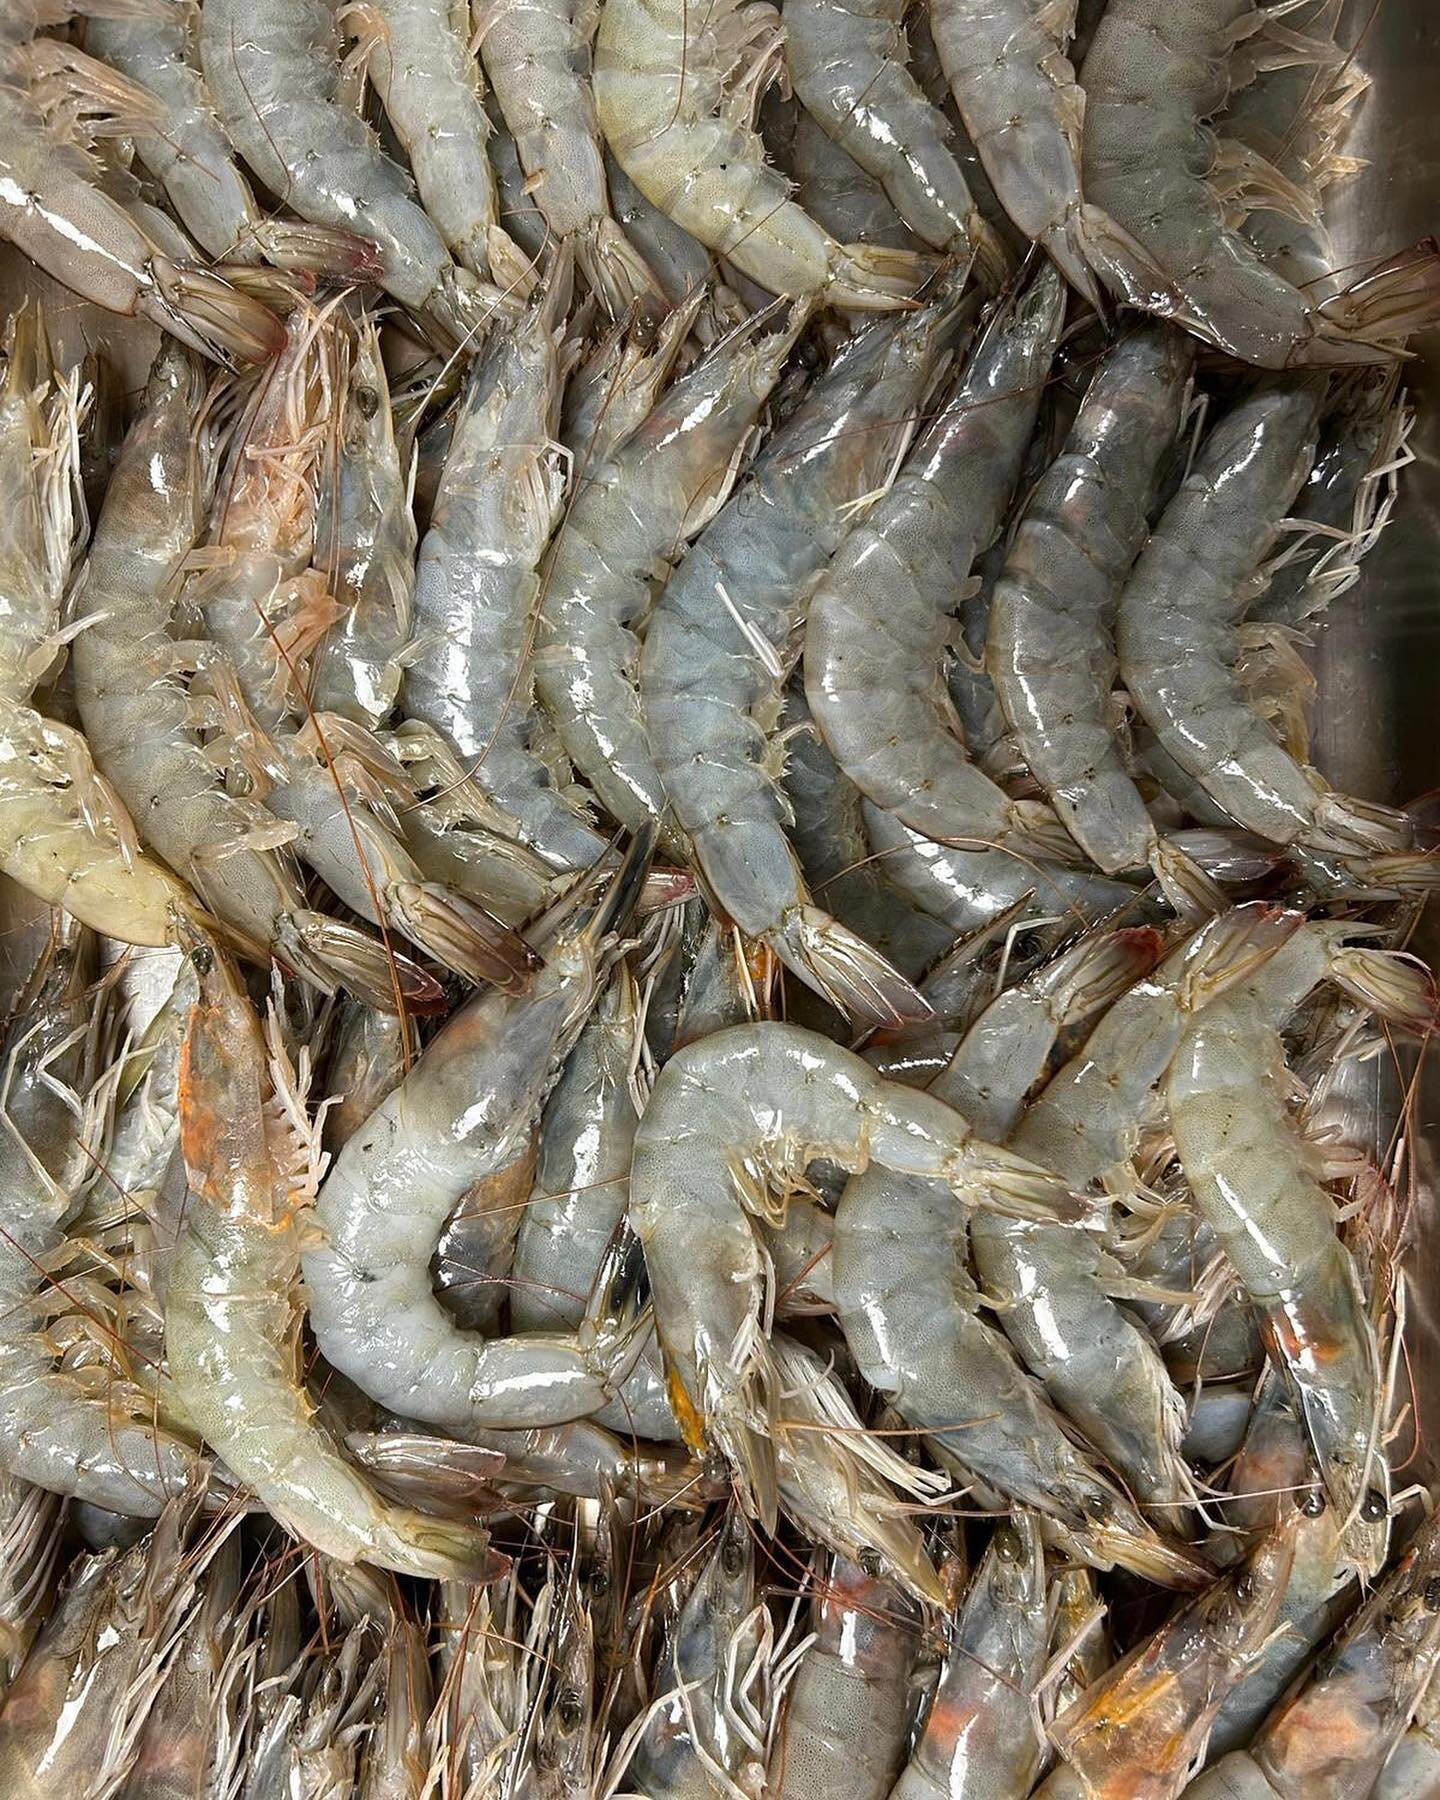 We&rsquo;ve got some of Billingsgate&rsquo;s finest prawns on tomorrow's Pasta Tuesday menu!

Our chefs headed to the UK&rsquo;s largest indoor fish market at 6am to bring you these beauties and this week's pasta plate of king prawns, garlic &amp; ch